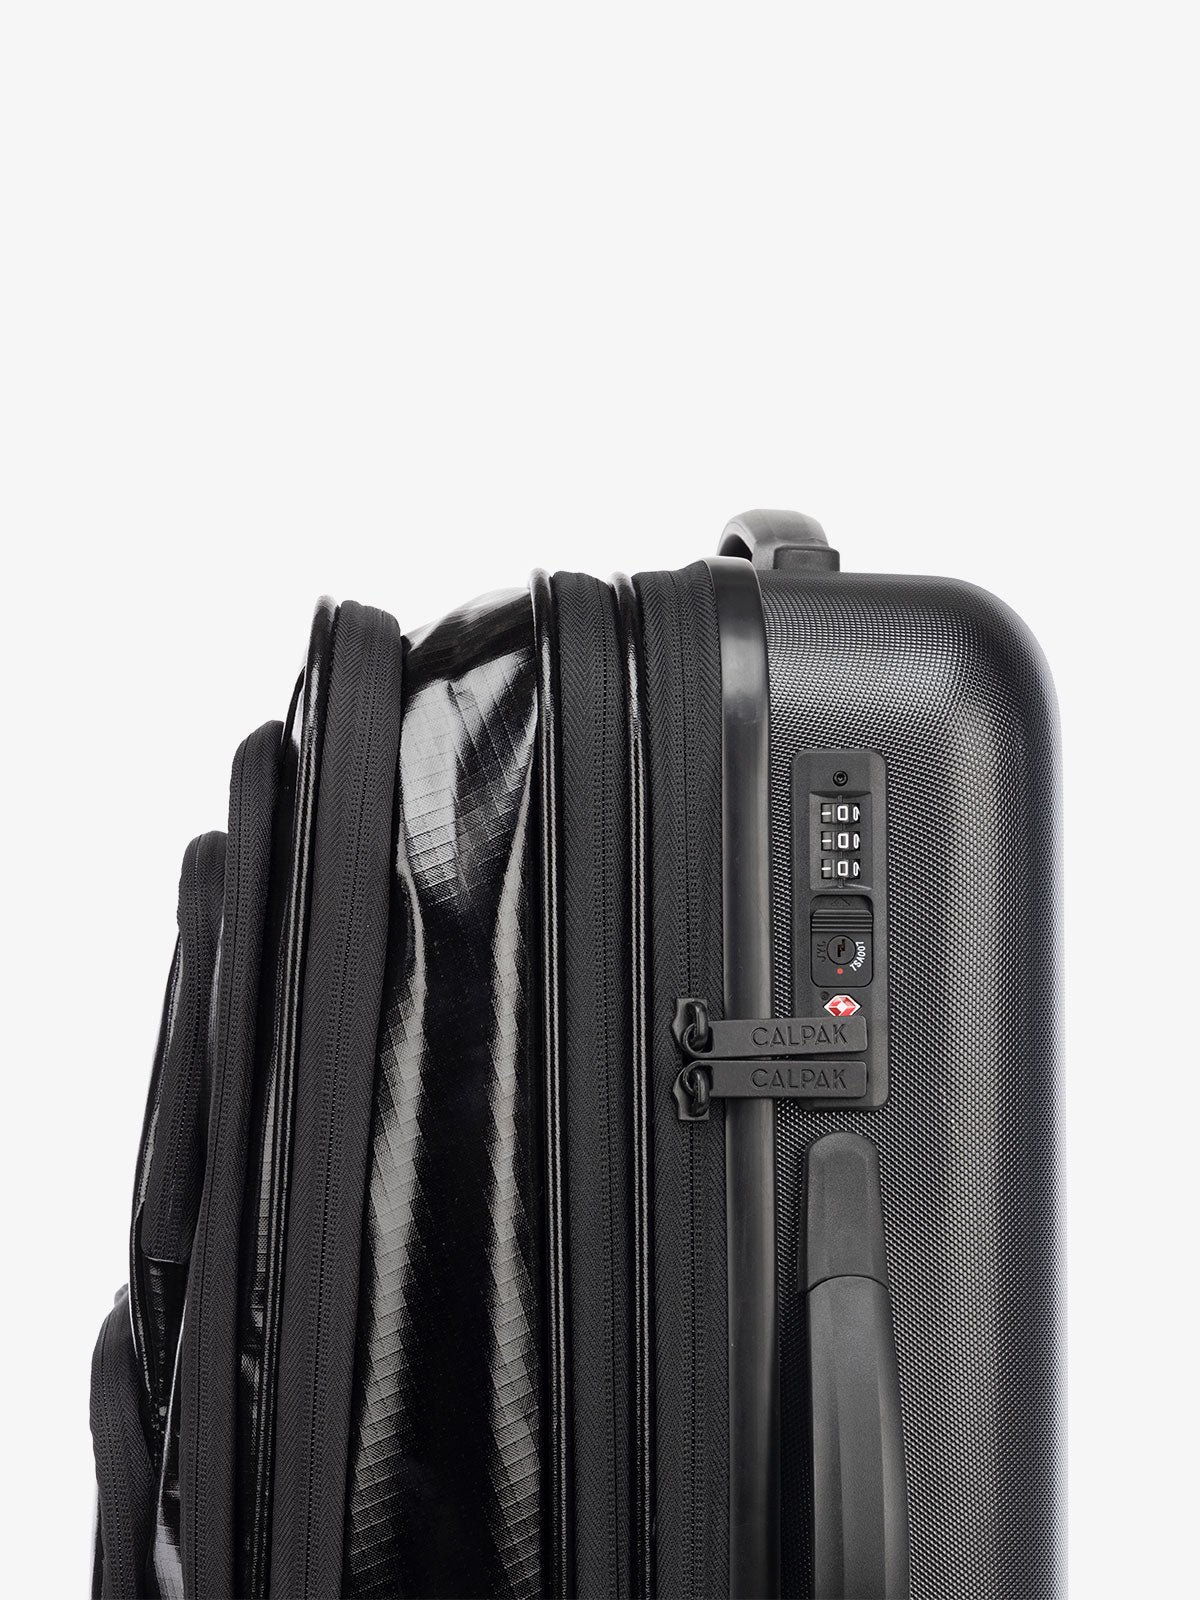 CALPAK Terra Carry-On expandable Luggage with soft and hard shell exterior TSA lock in obsidian